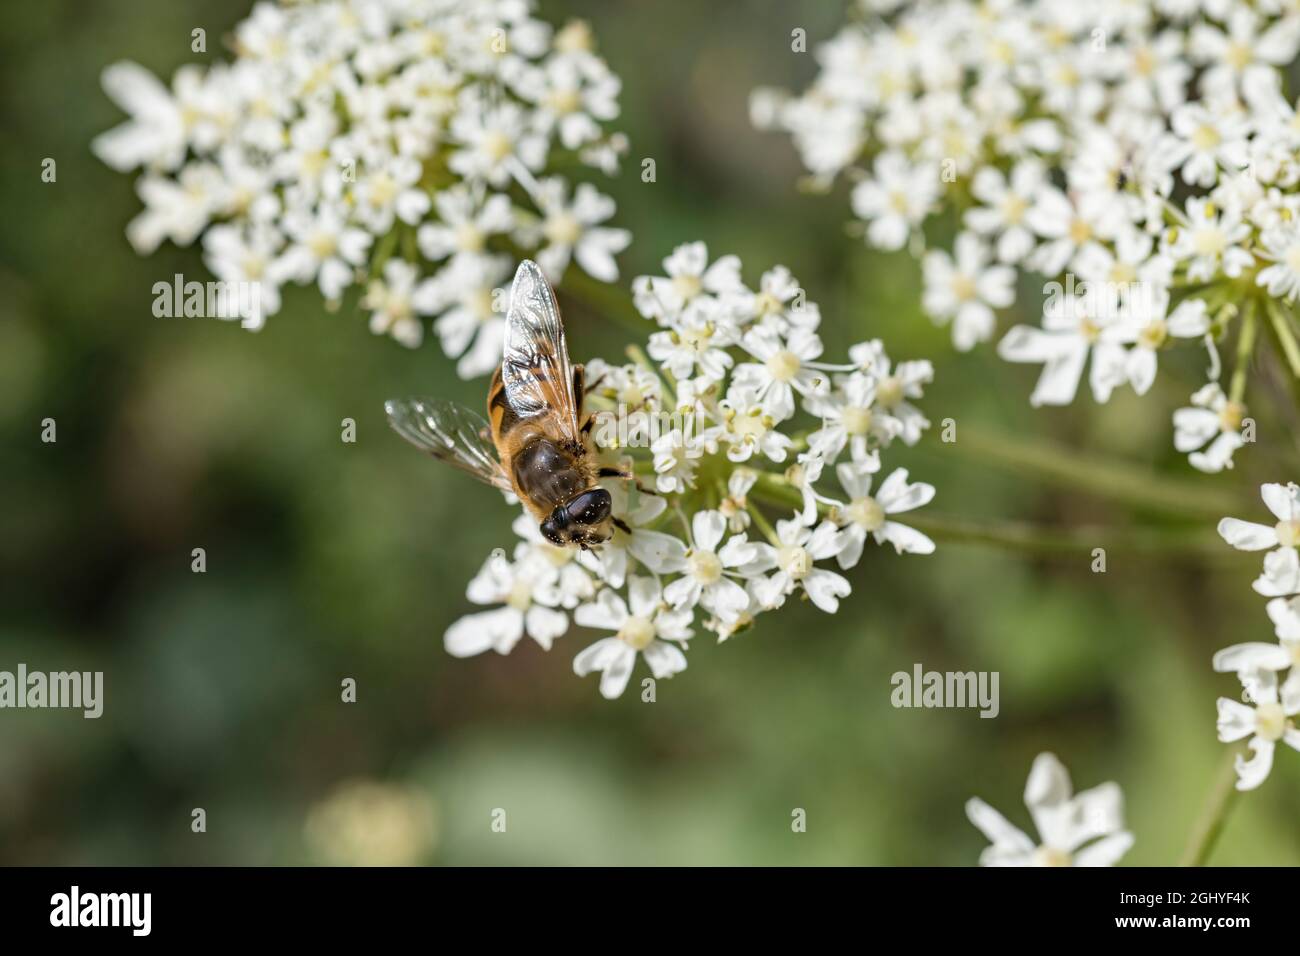 UK hoverfly on white Umbellifer flowers: thought to be male Eristalis tenax. Common summertime fly / flying insect. Stock Photo